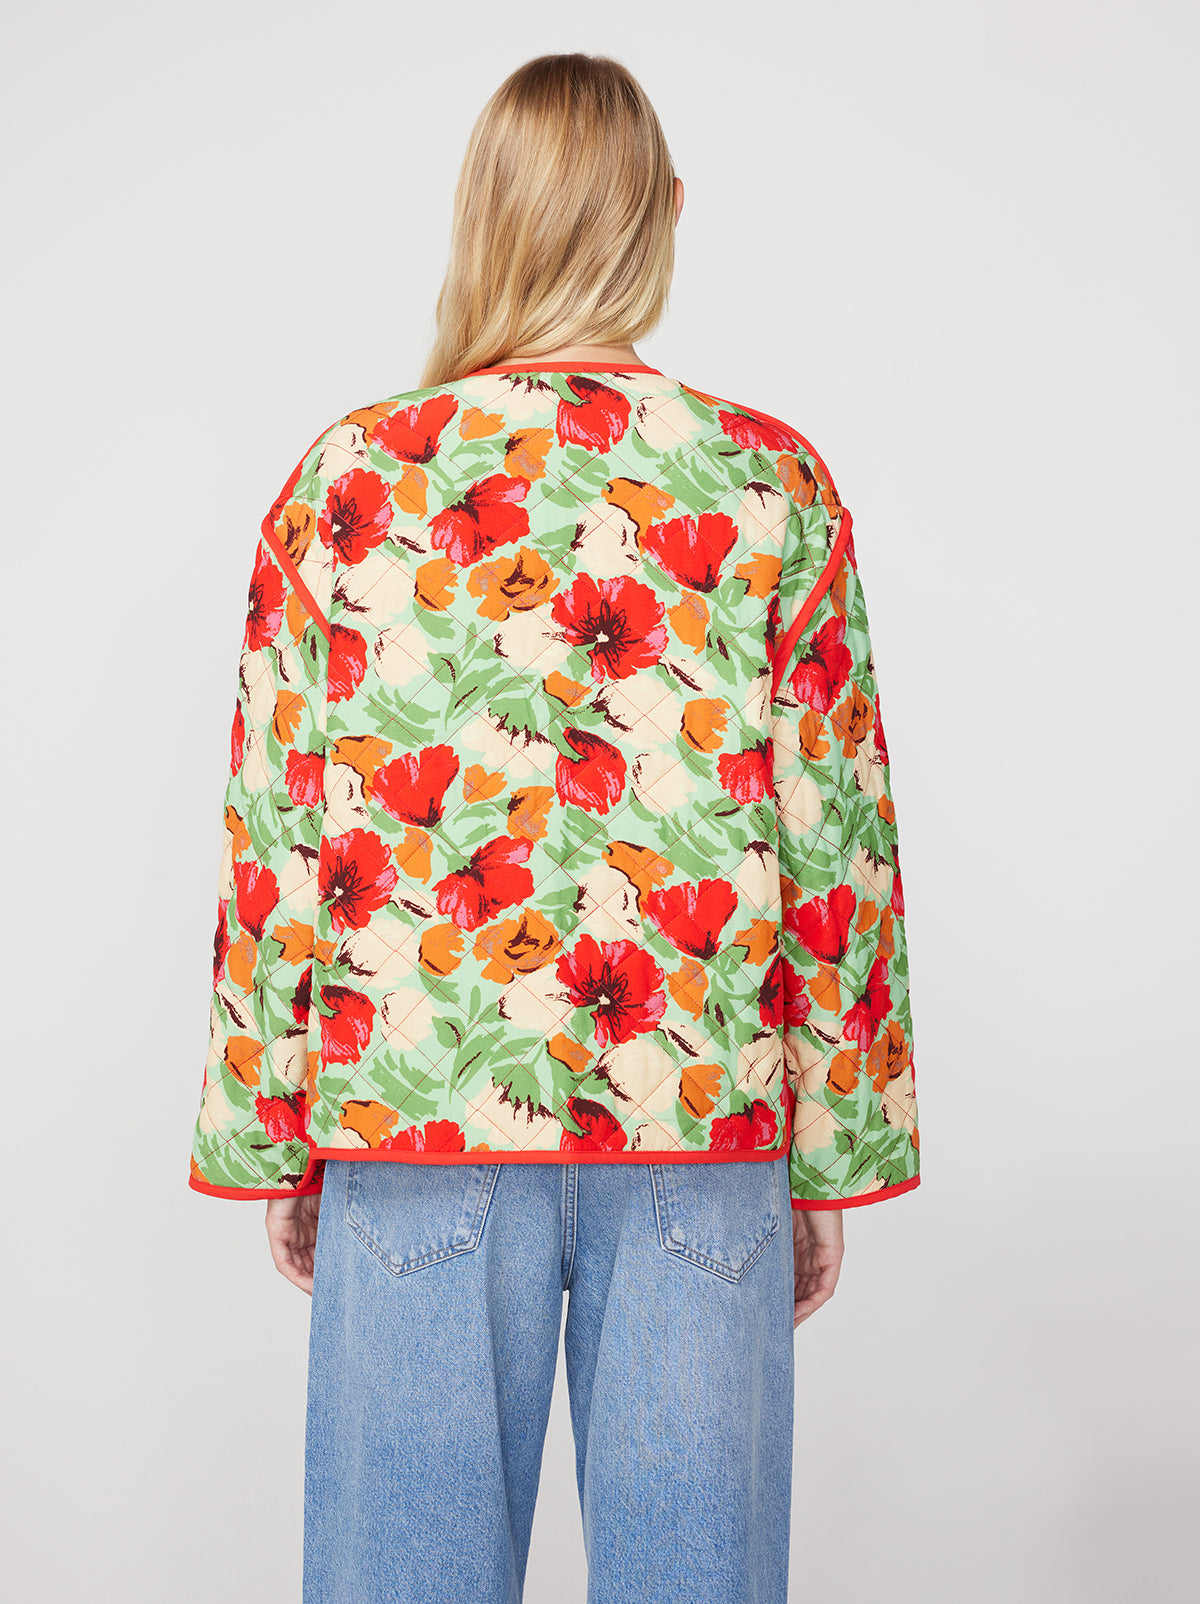 Theodora Green Garden Floral Reversible Quilted Jacket By KITRI Studio